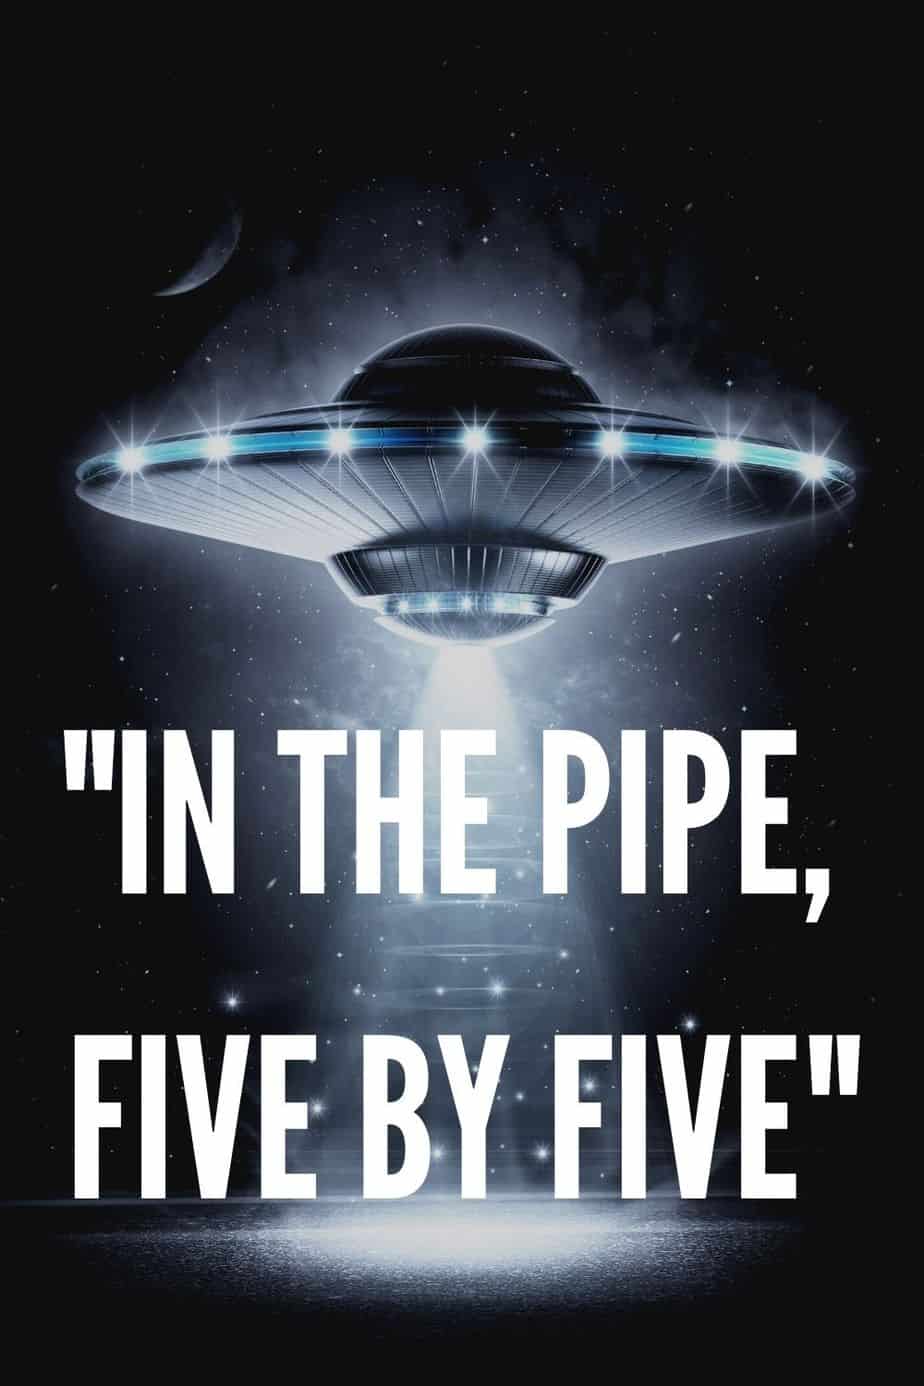 In the pipe five by five